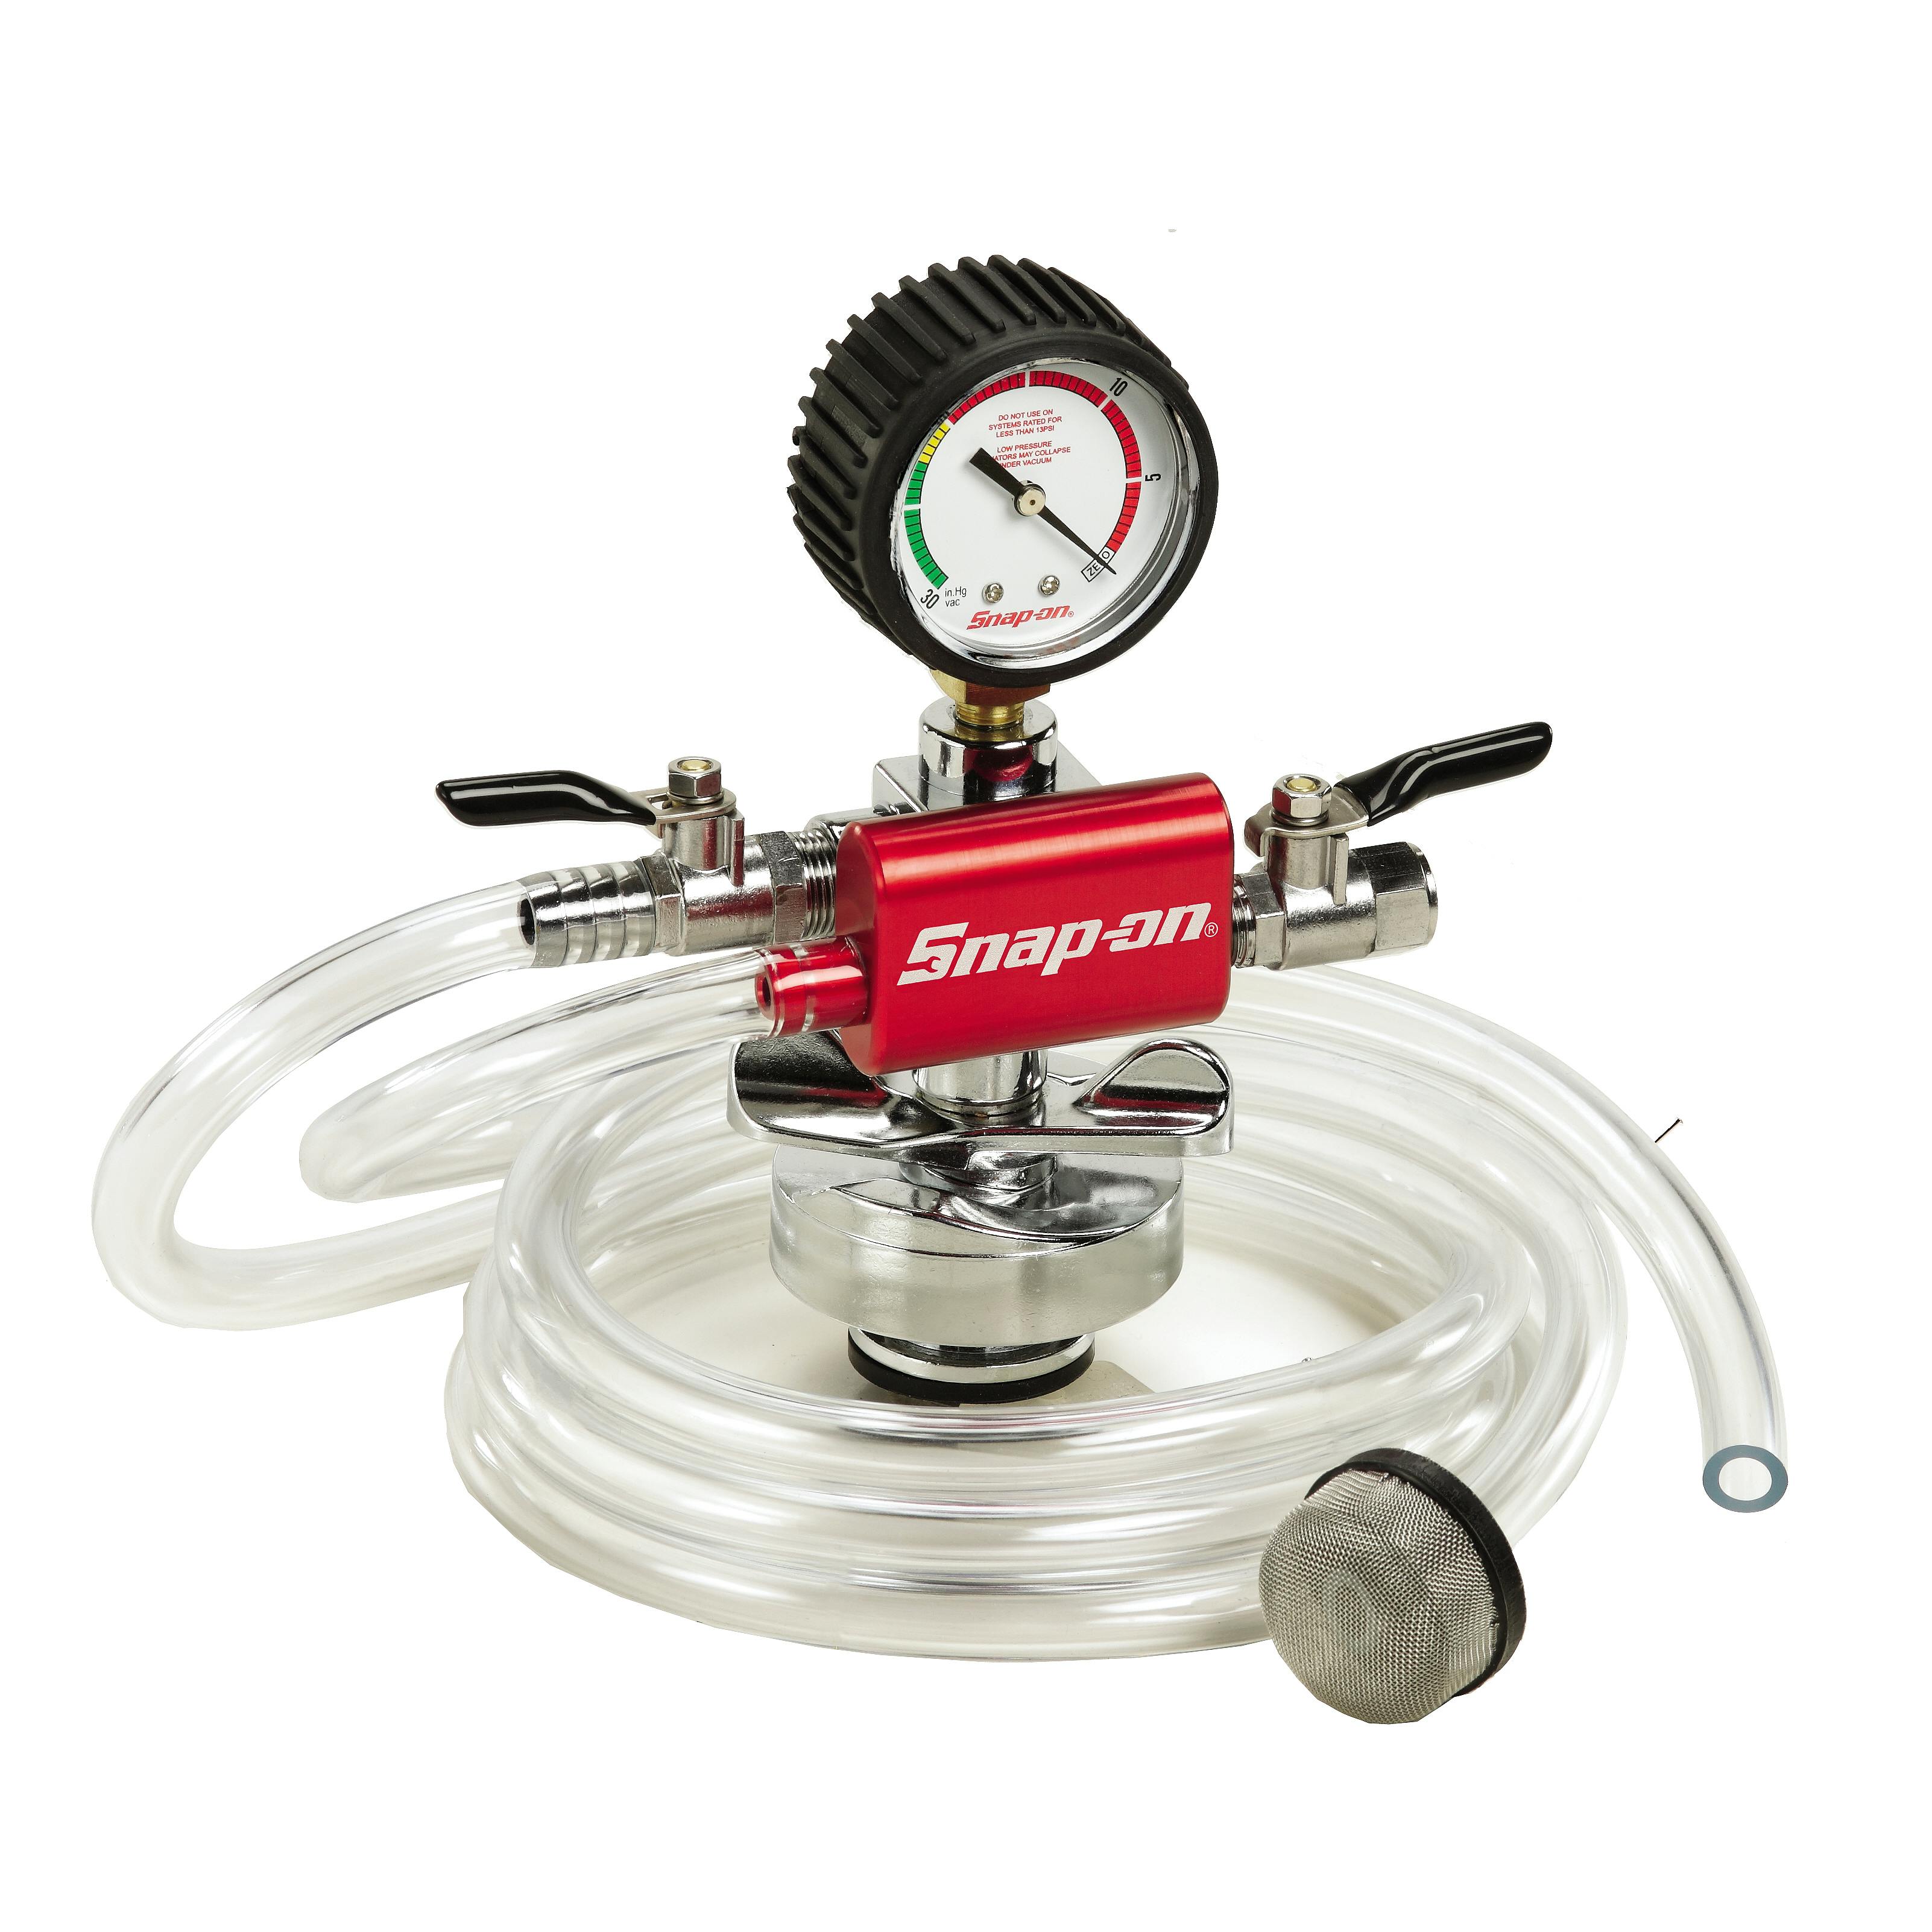 Vacuum Cooling System Filler | SVTSRAD272A | Snap-on Store